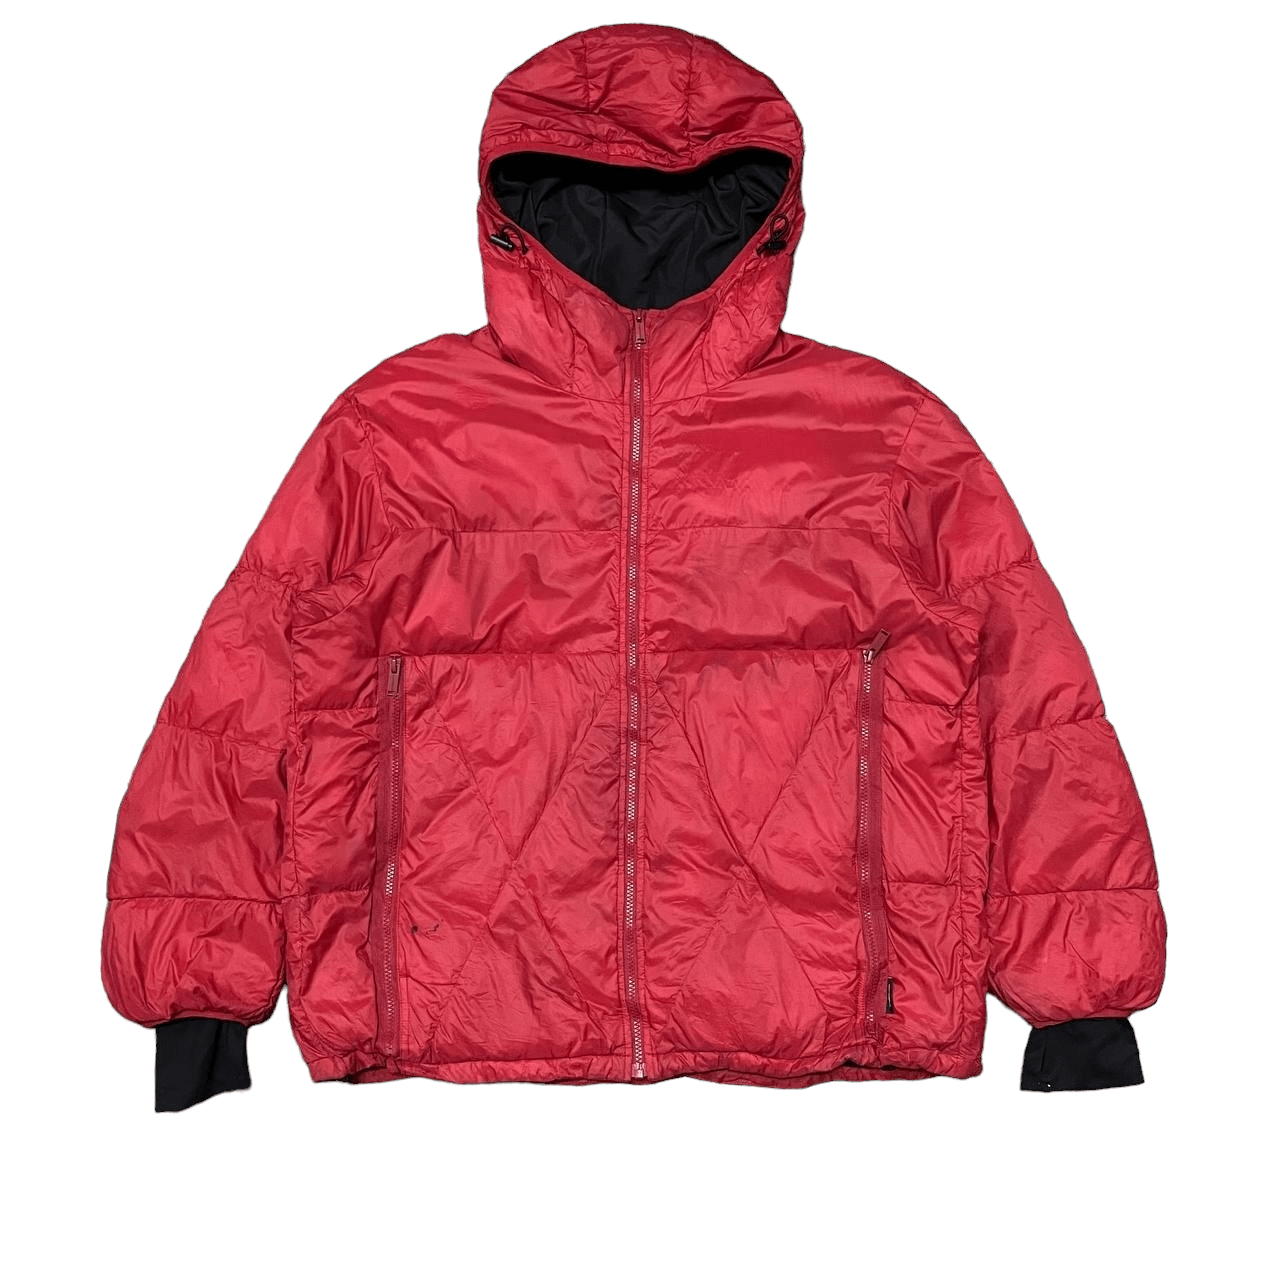 Undercover GU Padded Puffer Jacket Red XL - 2